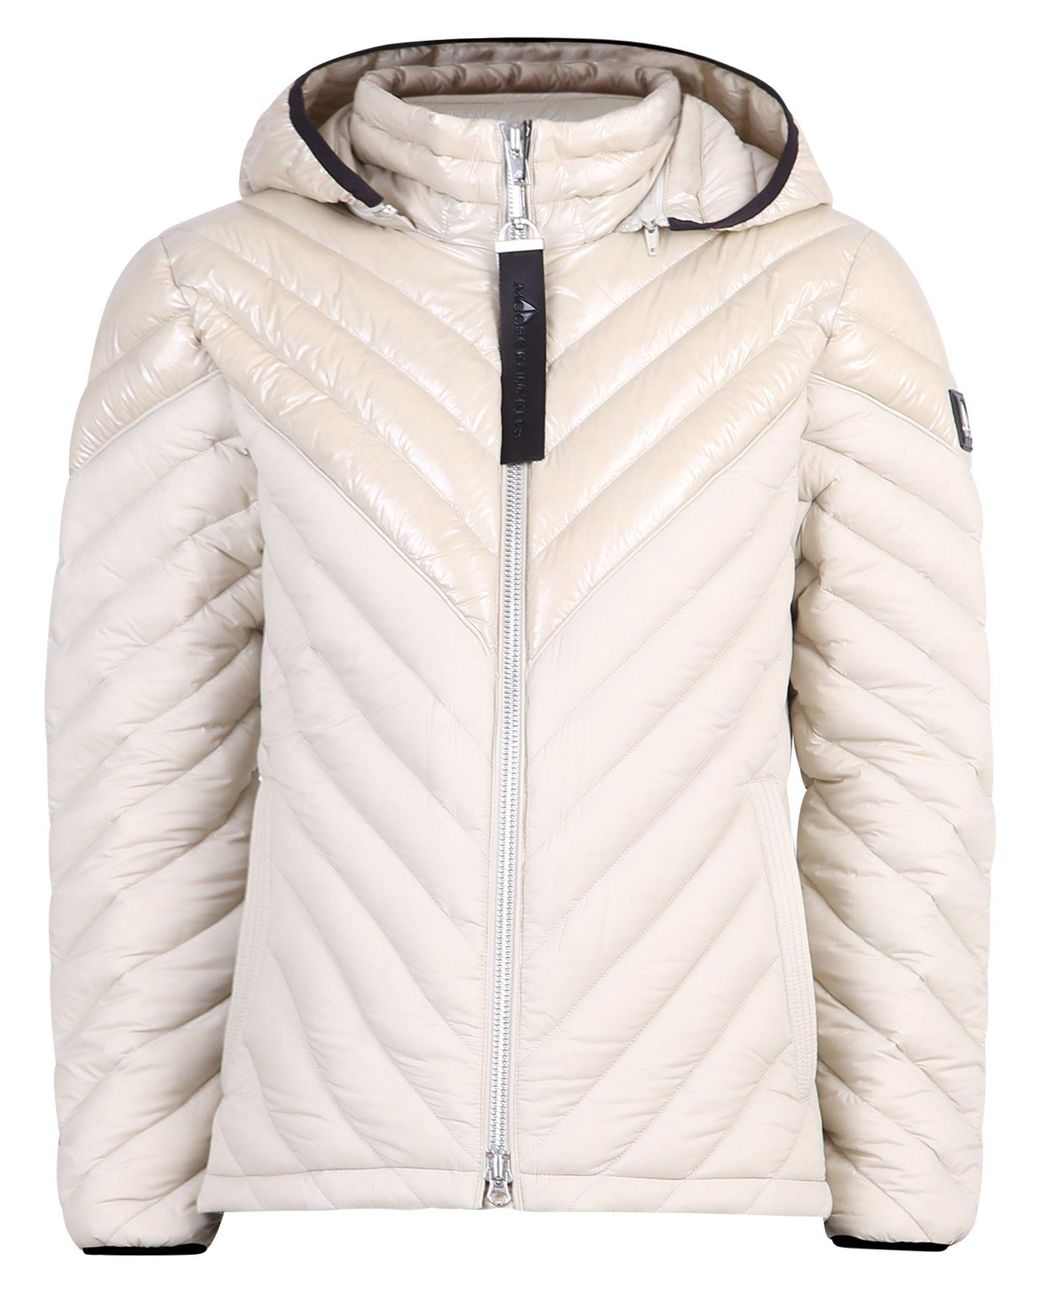 Moose Knuckles Synthetic Exhibition 2.0 Jacket in White - Lyst